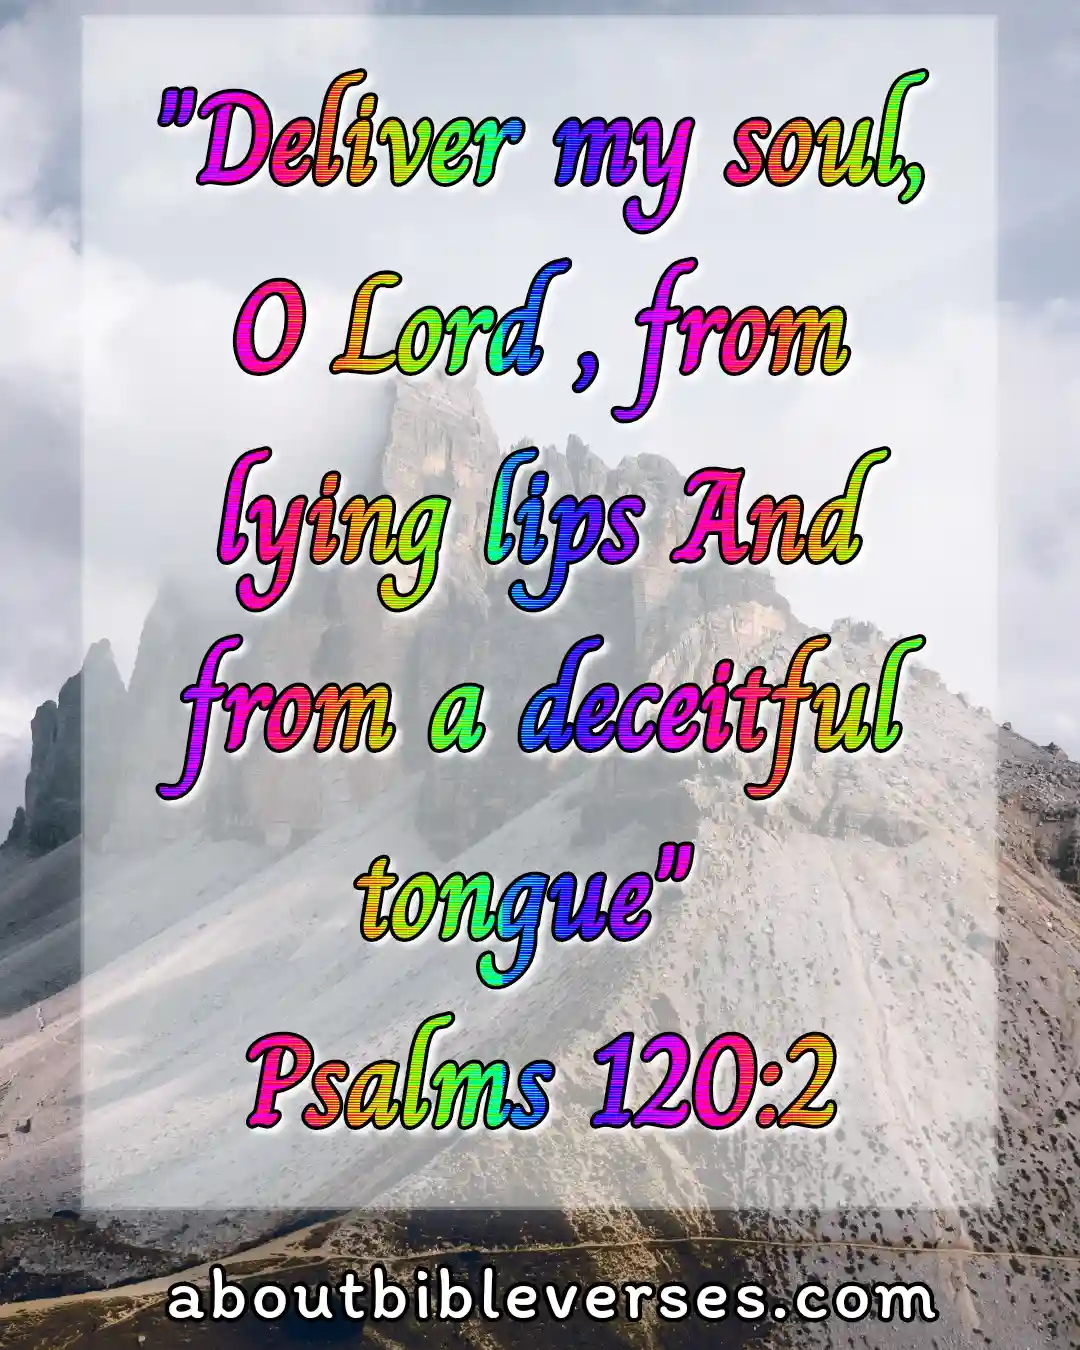 today bible verse (Psalm 120:2)